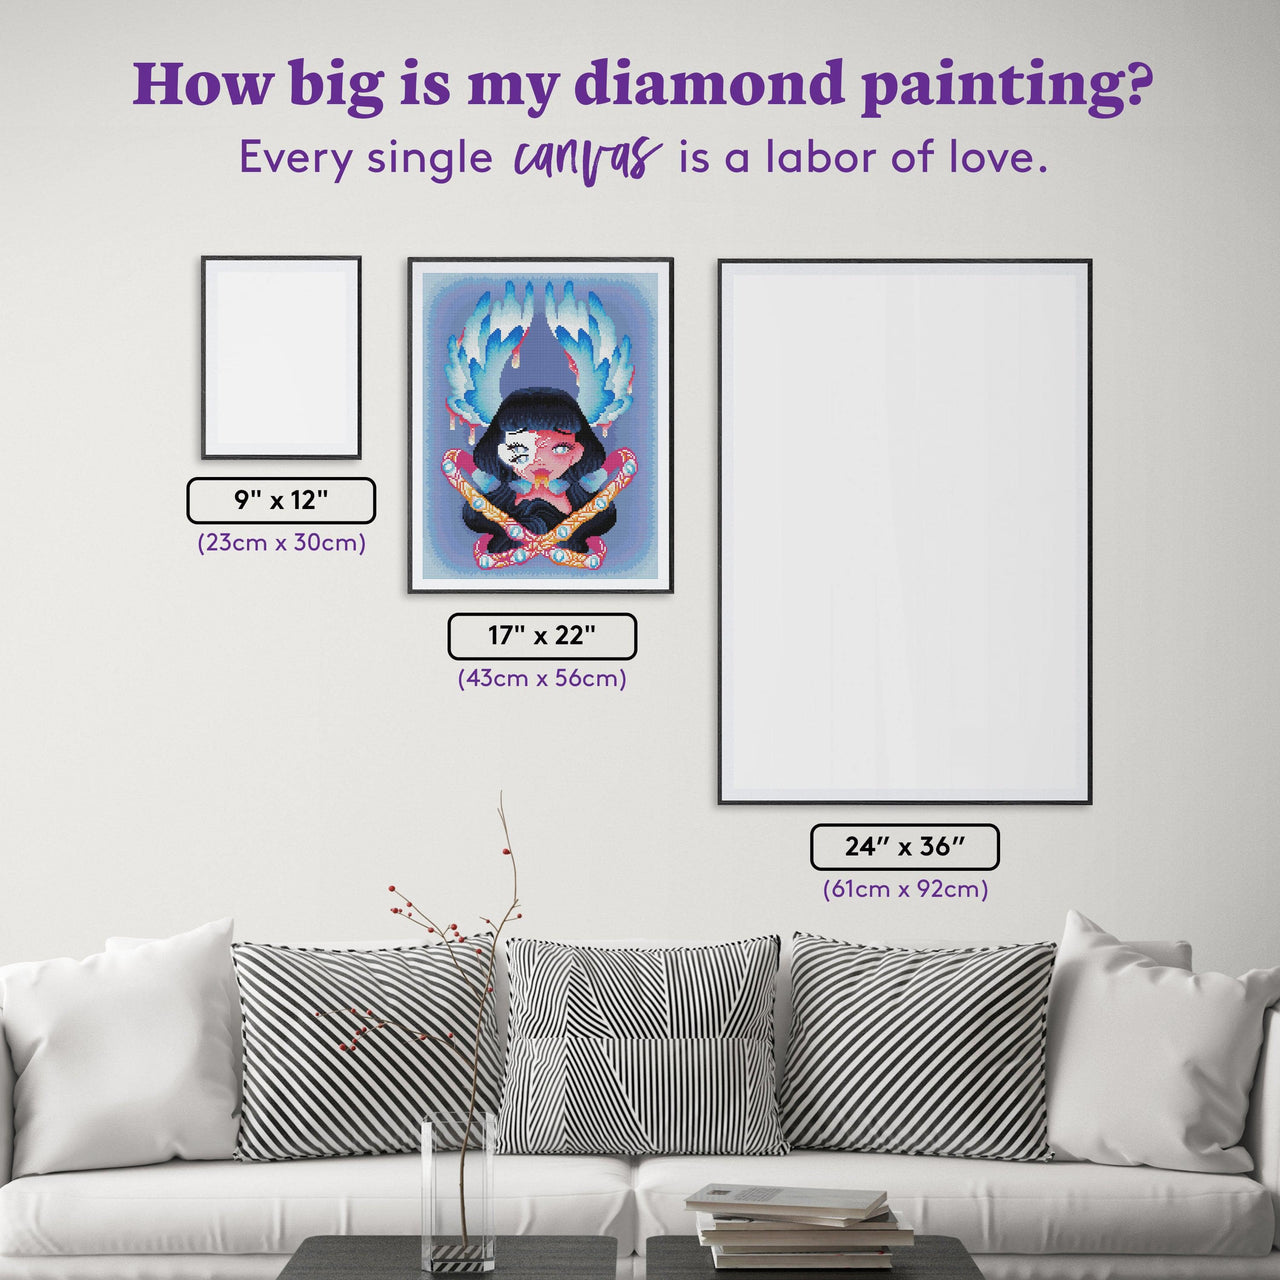 Diamond Painting Angel Eyes 17" x 22" (43cm x 56cm) / Round with 37 Colors including 3 ABs / 30,447